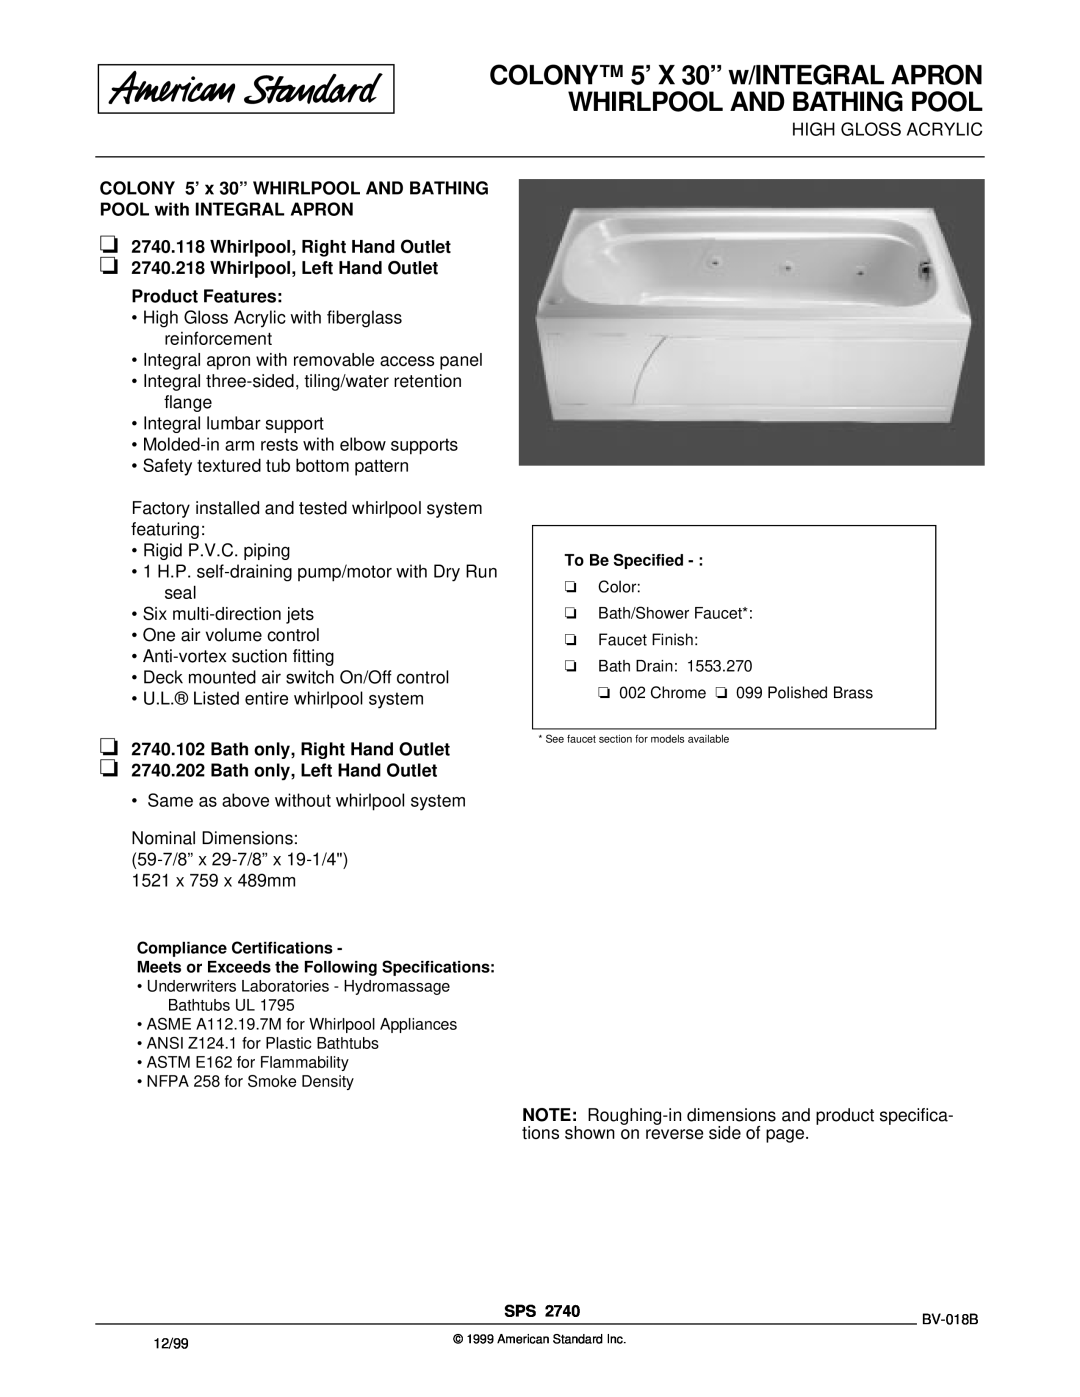 American Standard 2740.202, 2740.218, 2740.118 dimensions Whirlpool, Right Hand Outlet, Bath only, Right Hand Outlet 